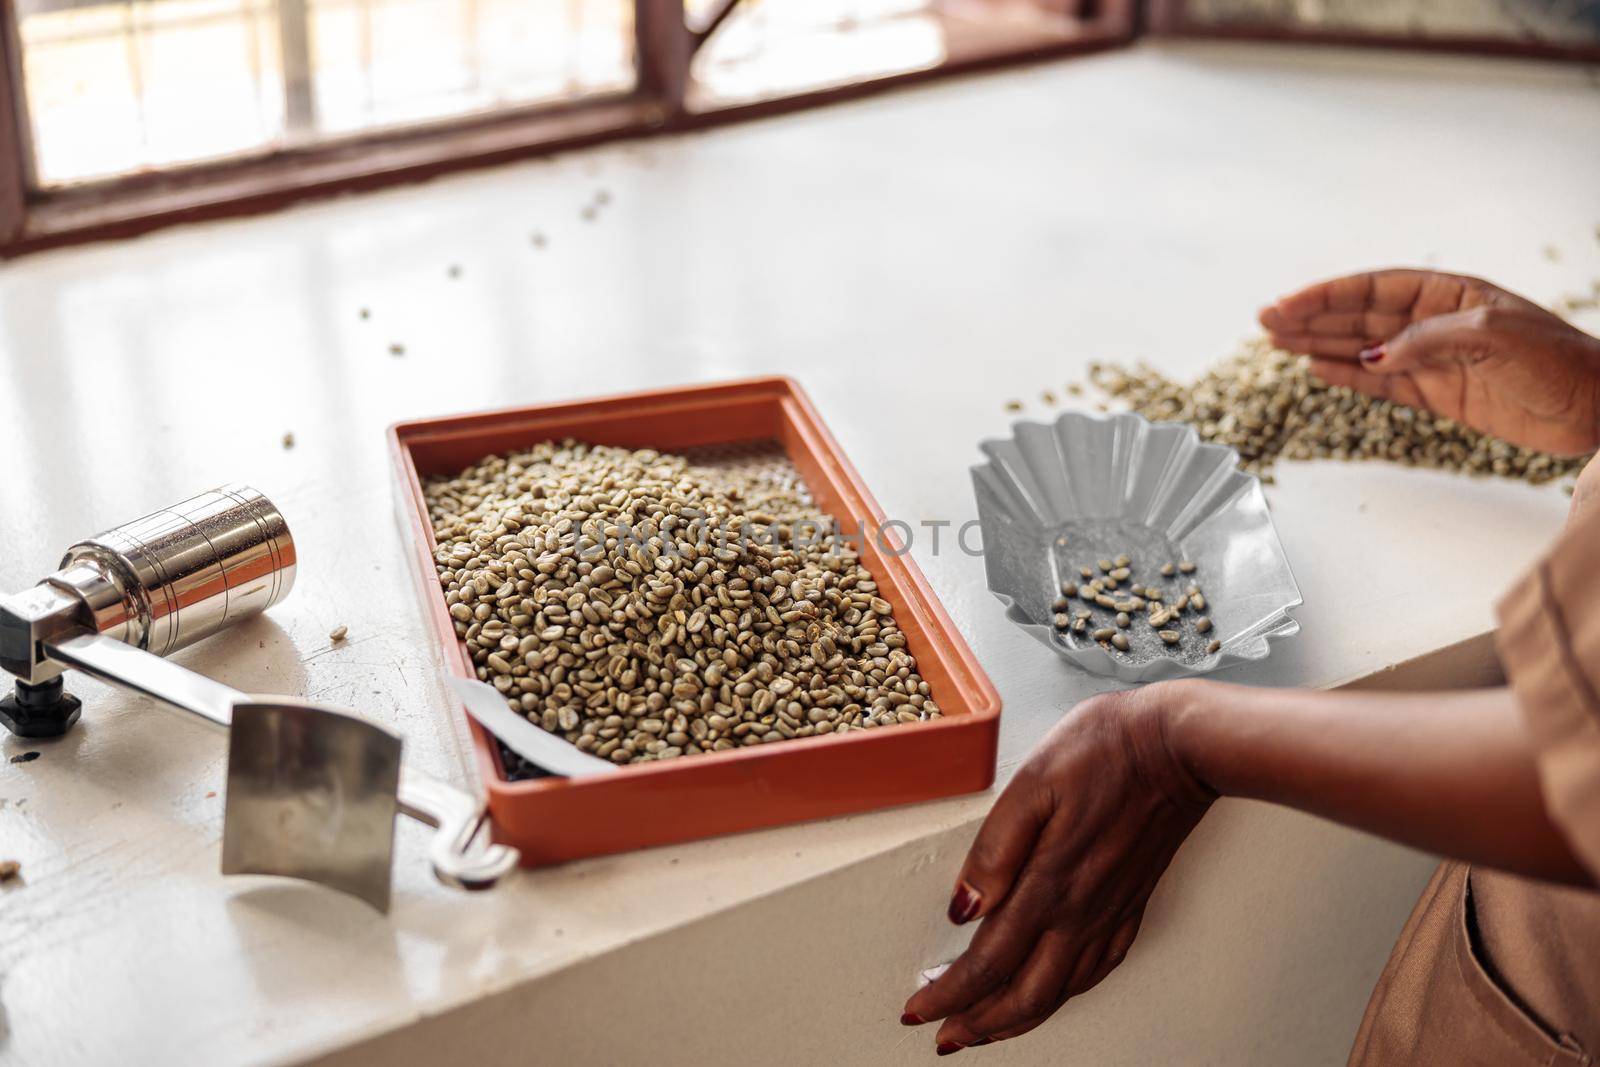 Female worker sorting coffee beans by size using a sieve by Yaroslav_astakhov